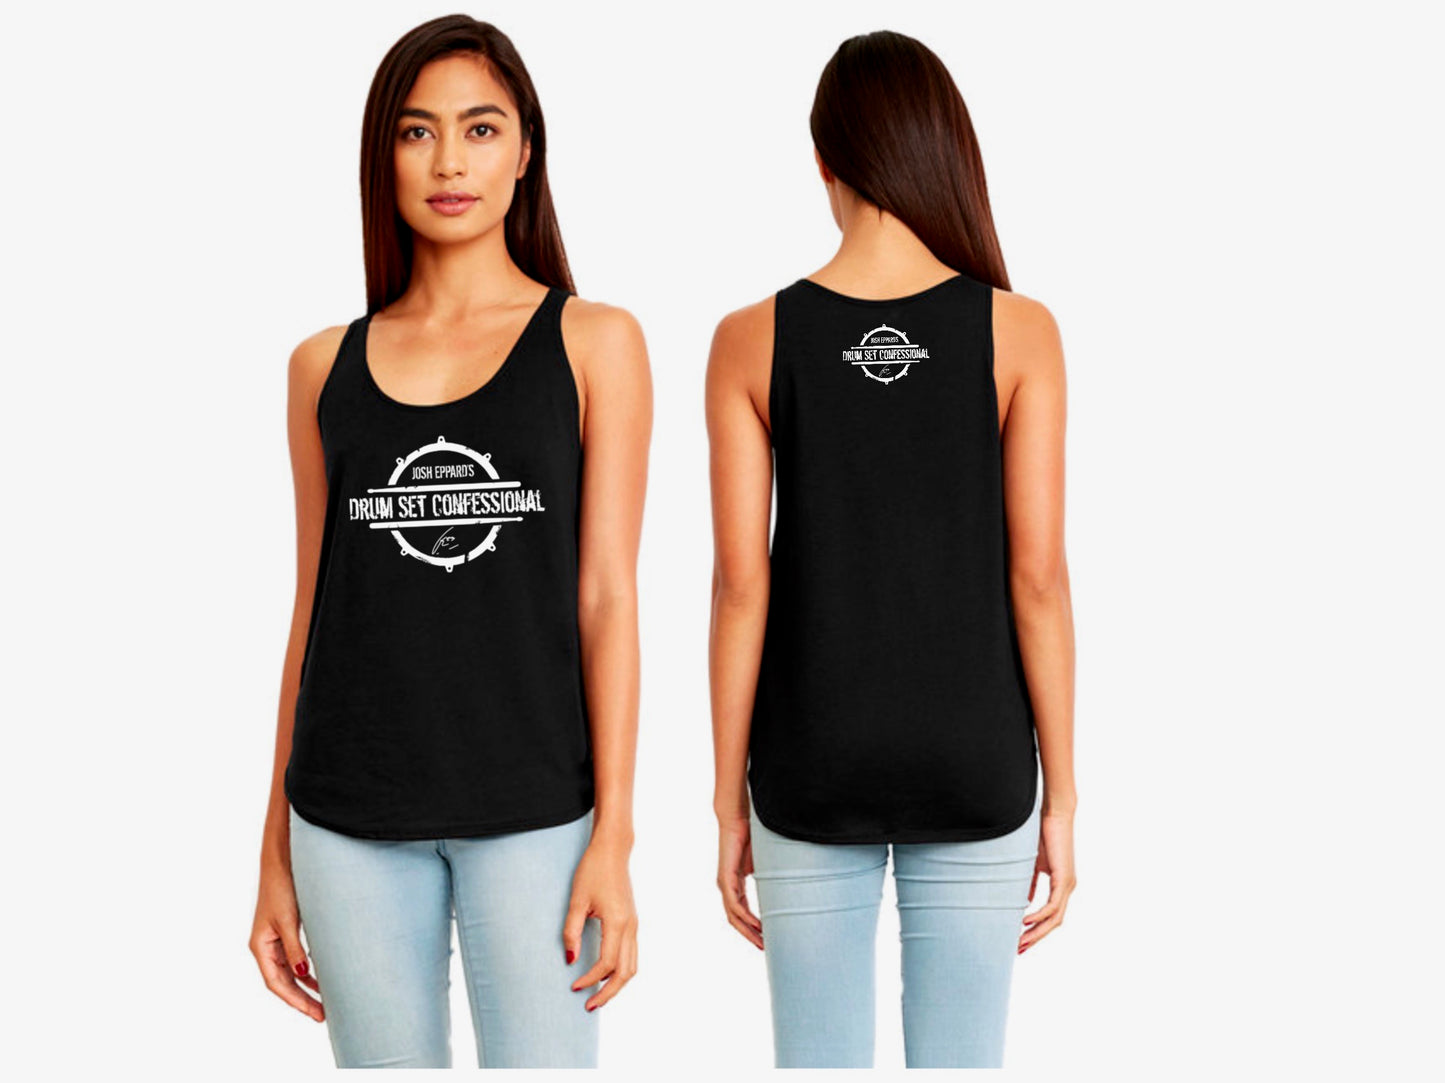 DSC Signature Black Next Level Apparel Ladies' Festival Tank (100% of profits fuel outreach and donations to addiction/recovery causes.)